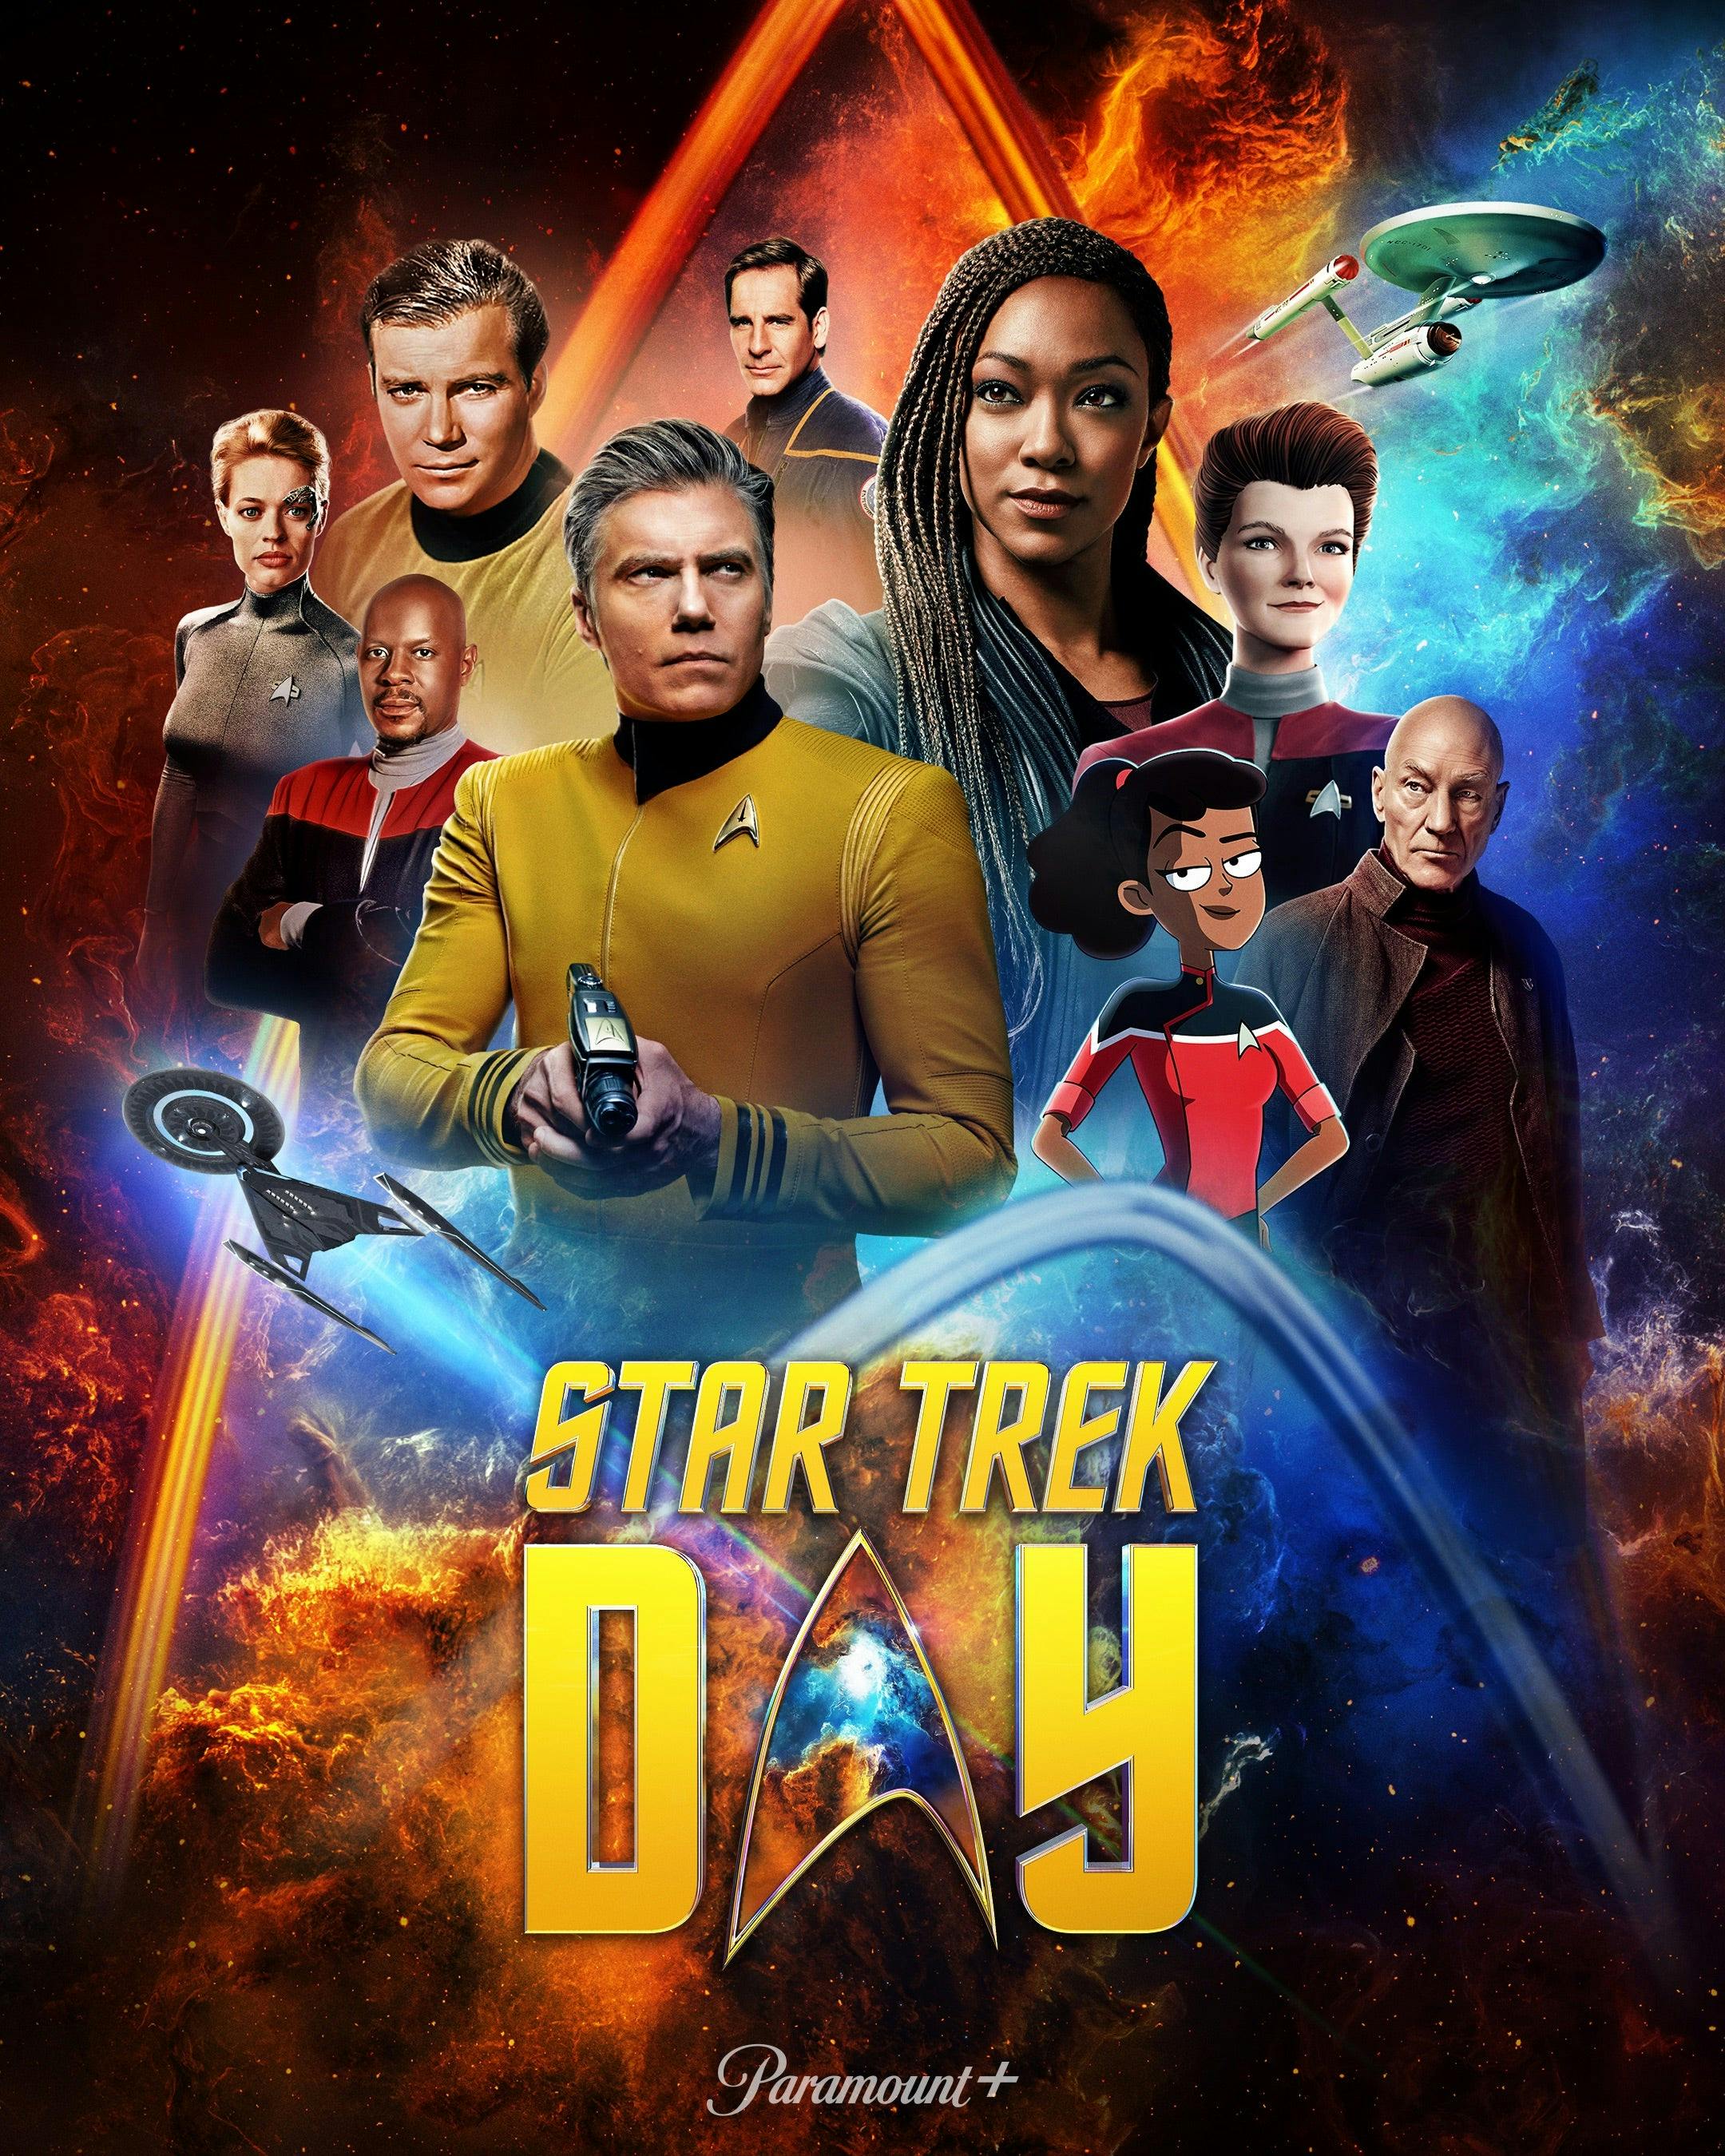 Celebrate Star Trek Day 2021 With Live-Streamed Panels and More | Star Trek